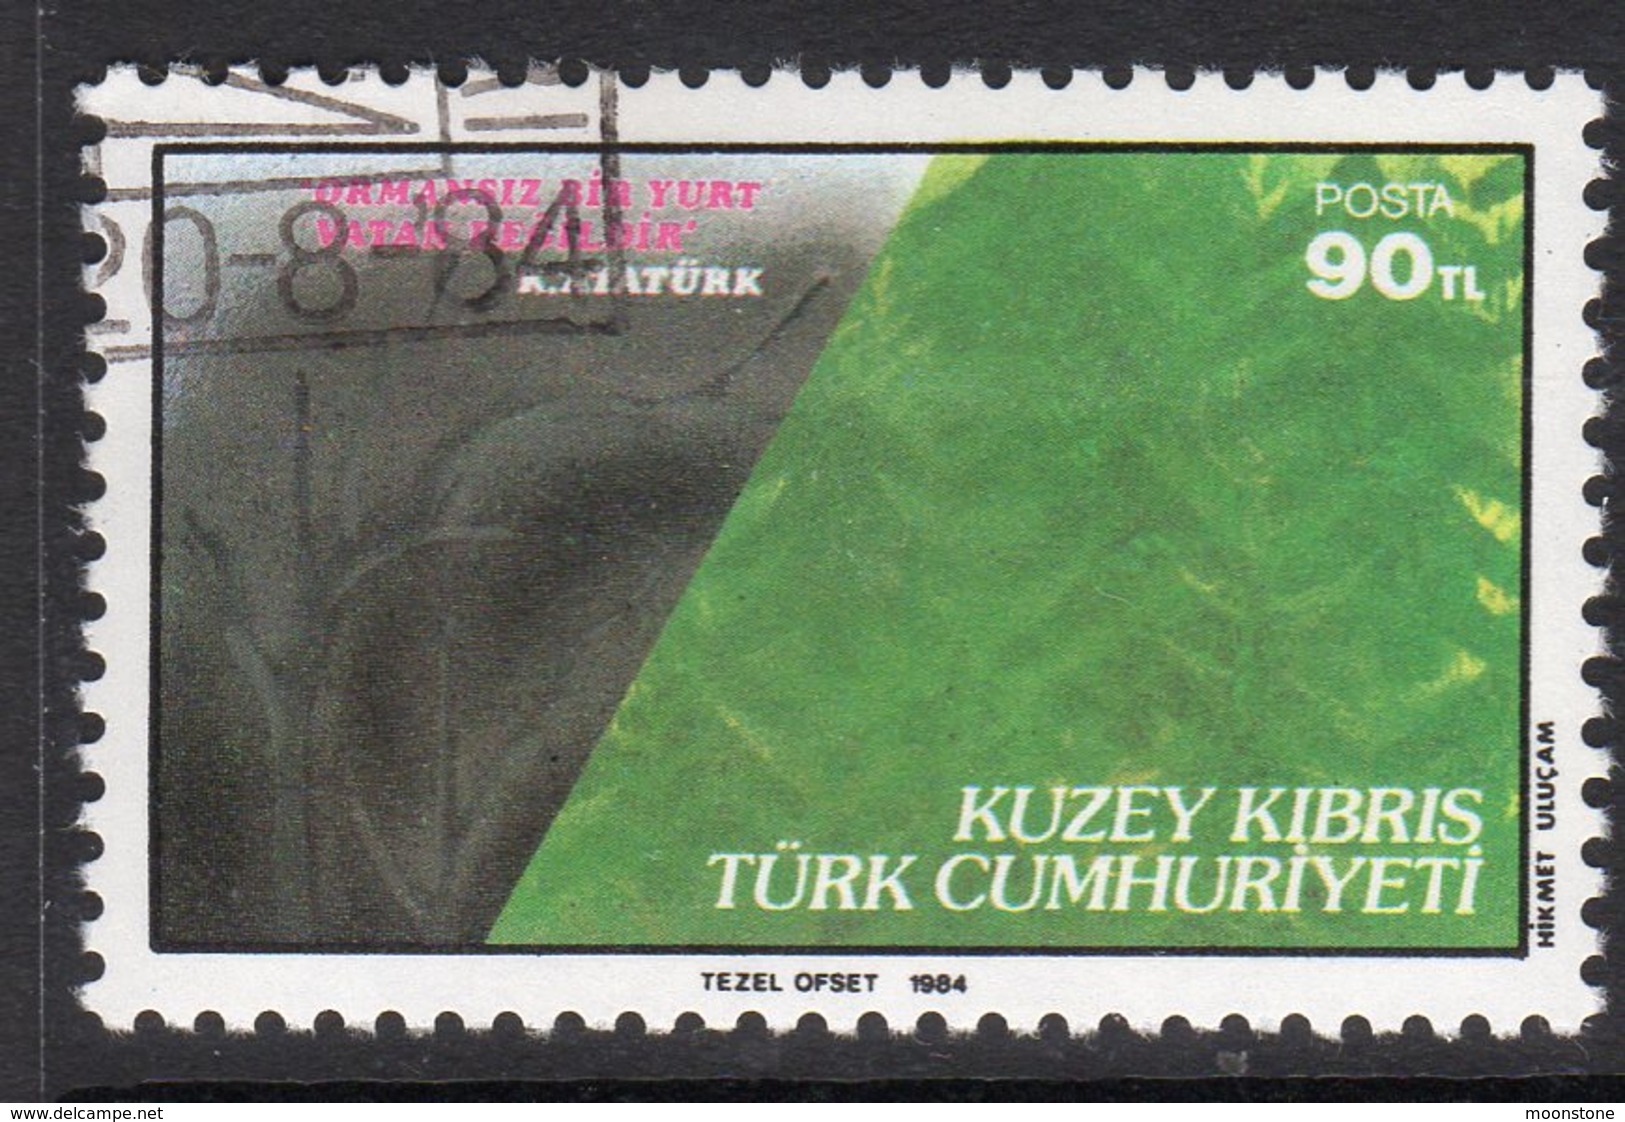 Cyprus Turkish 1984 World Forestry Resources, Used, SG 156 (A) - Oblitérés